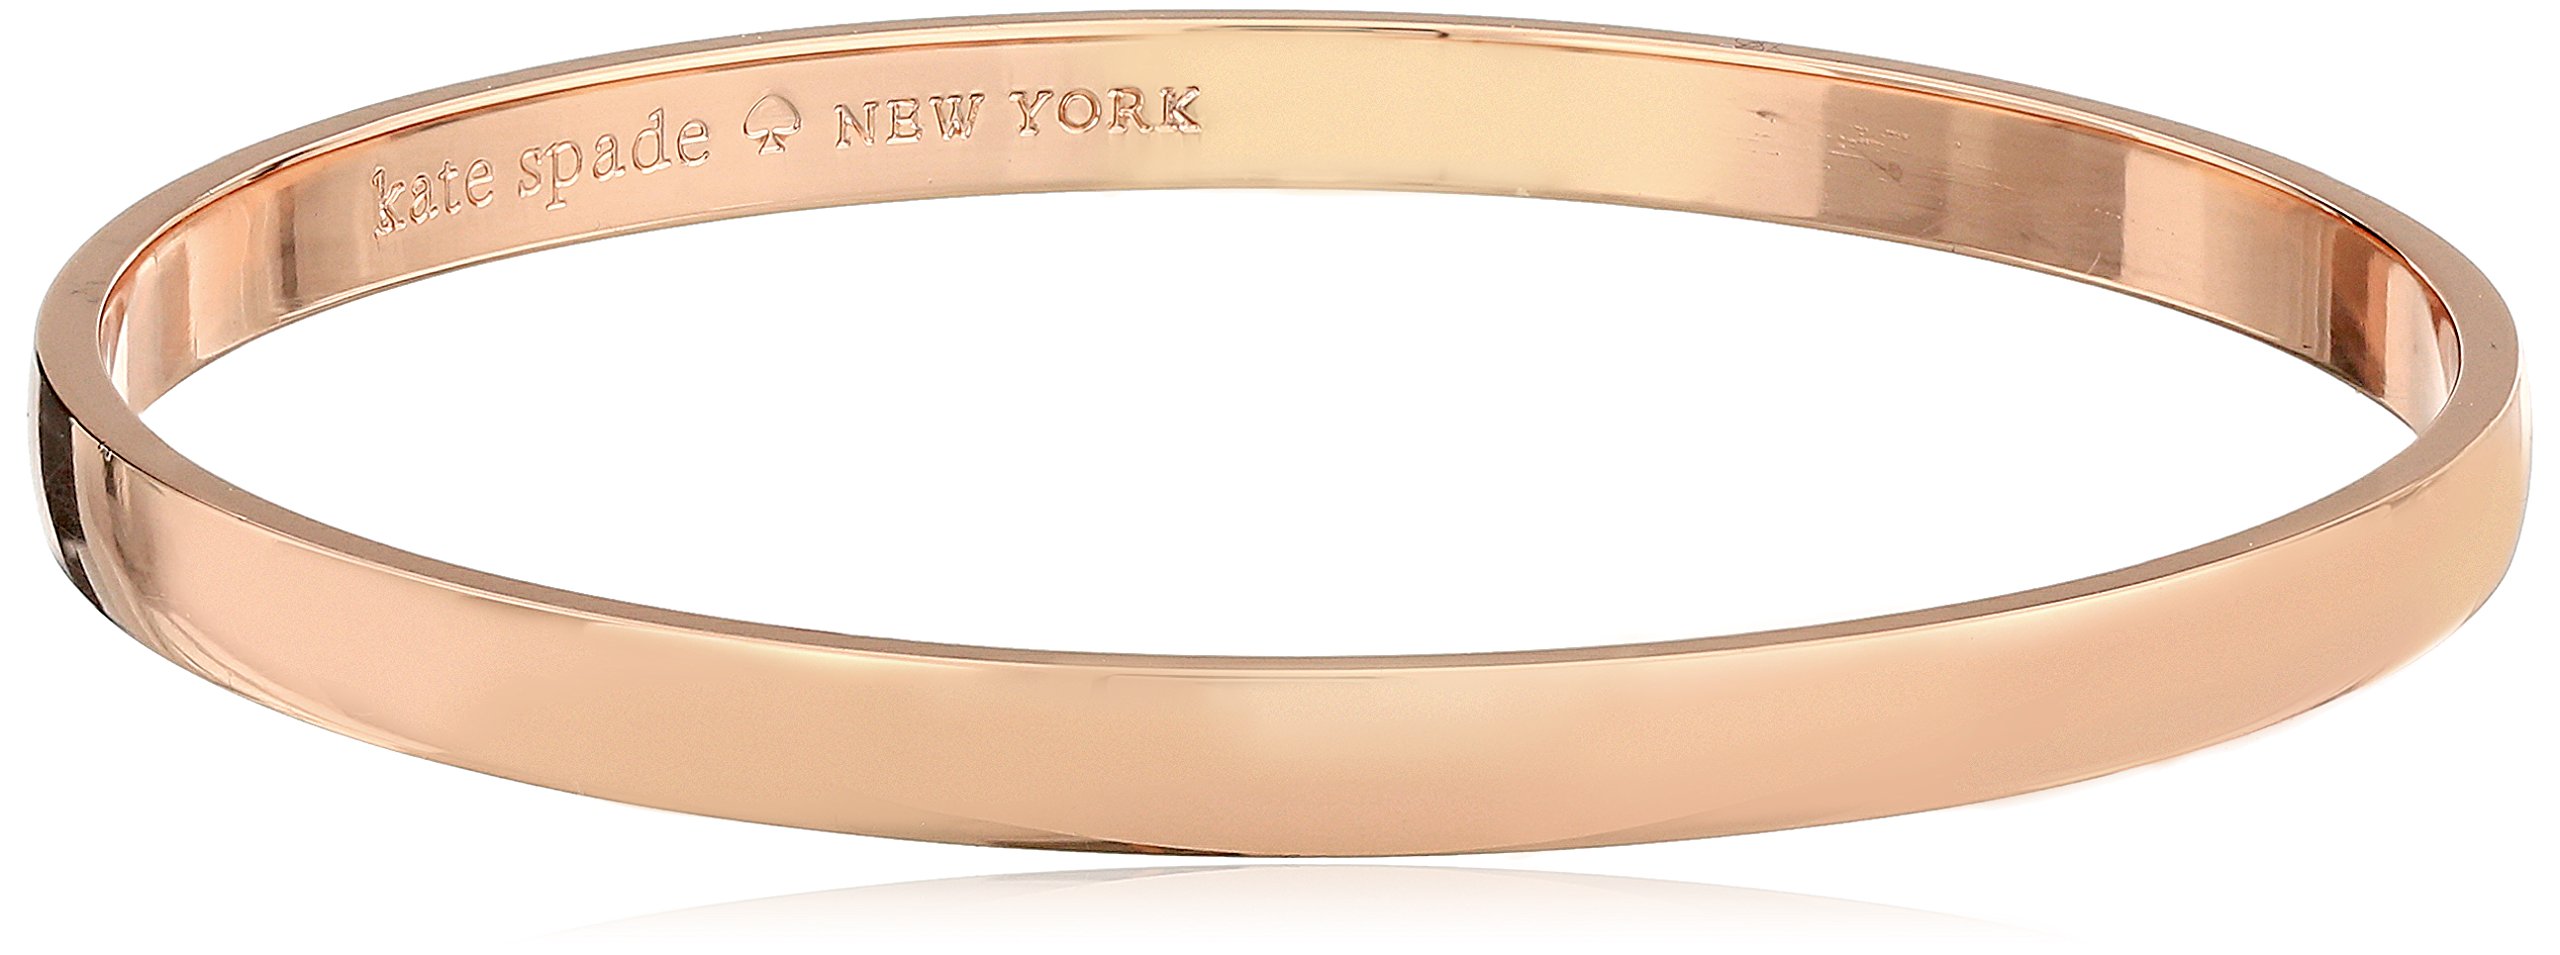 Kate Spade New York Women's Idiom Bangles Stop and Smell The Roses - Solid